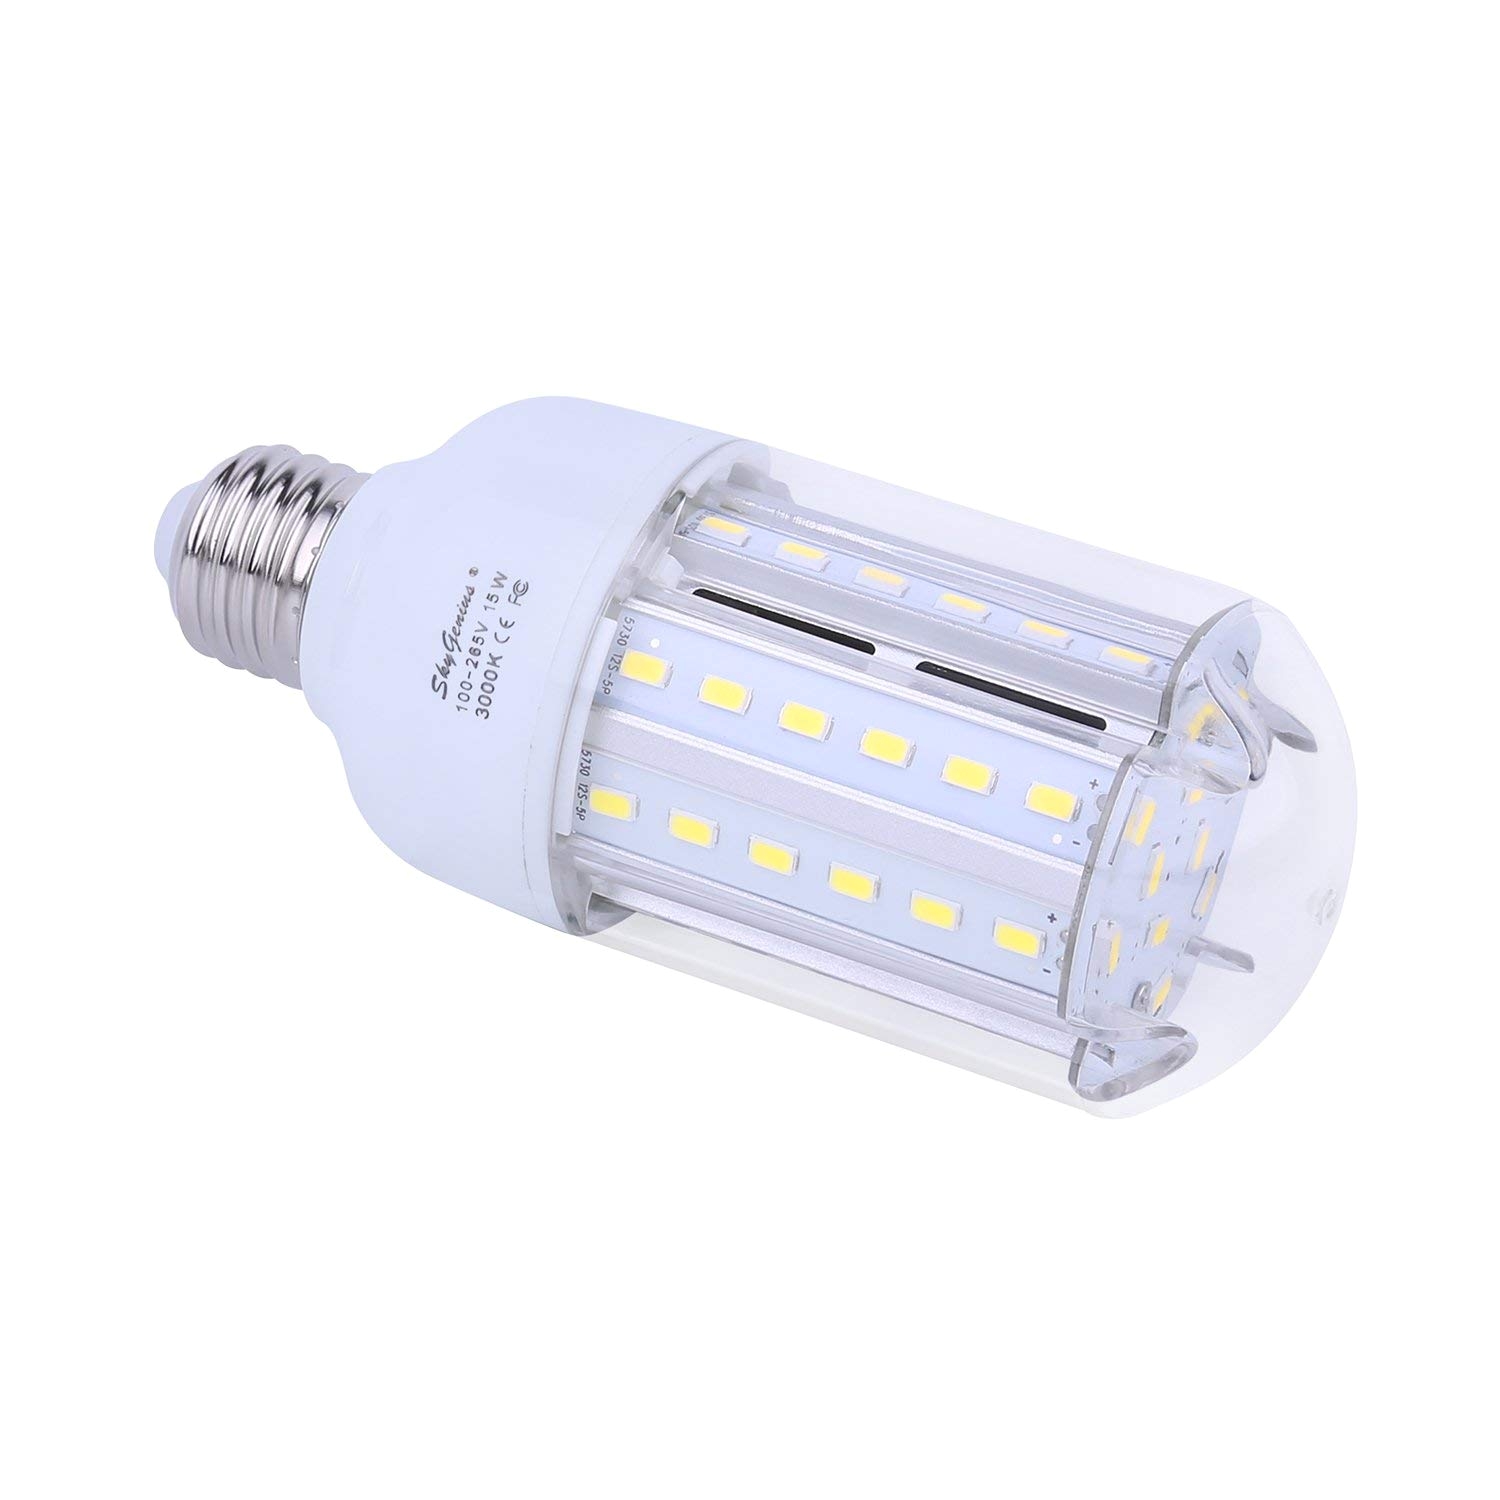 15w daylight led corn light bulb 100w incandescent replacement e26 socket 1500lm bright 6500k for home lighting garage kitchen bathroom porch bedroom